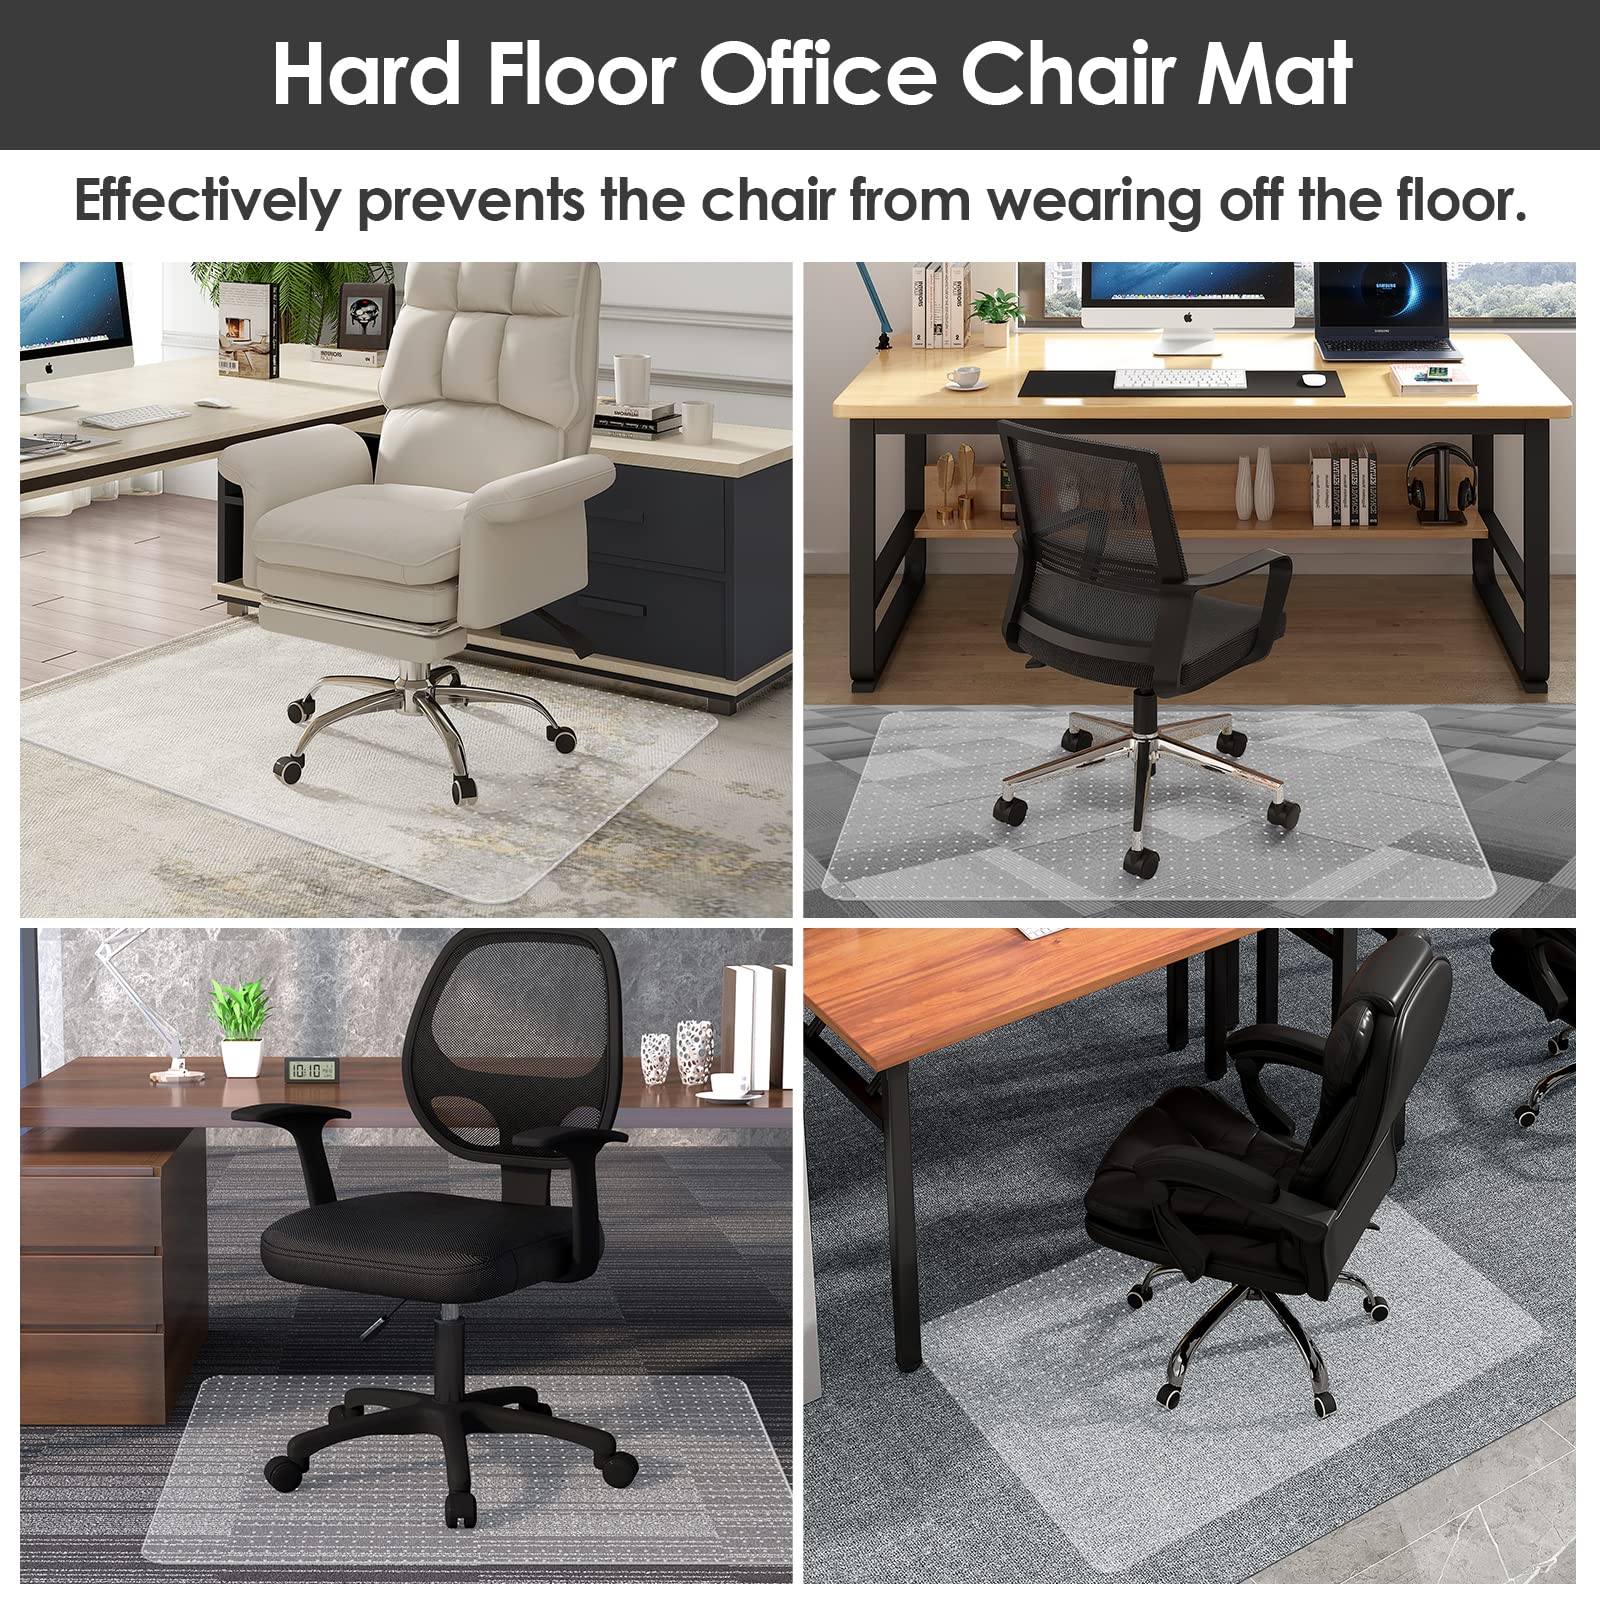 MONICAT Office Chair Mat for Carpet Floor,Heavy Duty Desk Chair Mat for Carpeted Floors,Computer Gaming Plastic Floor Mat for Office Chair on Low and No Pile Carpet,Smooth Glide,Transparent 30x48